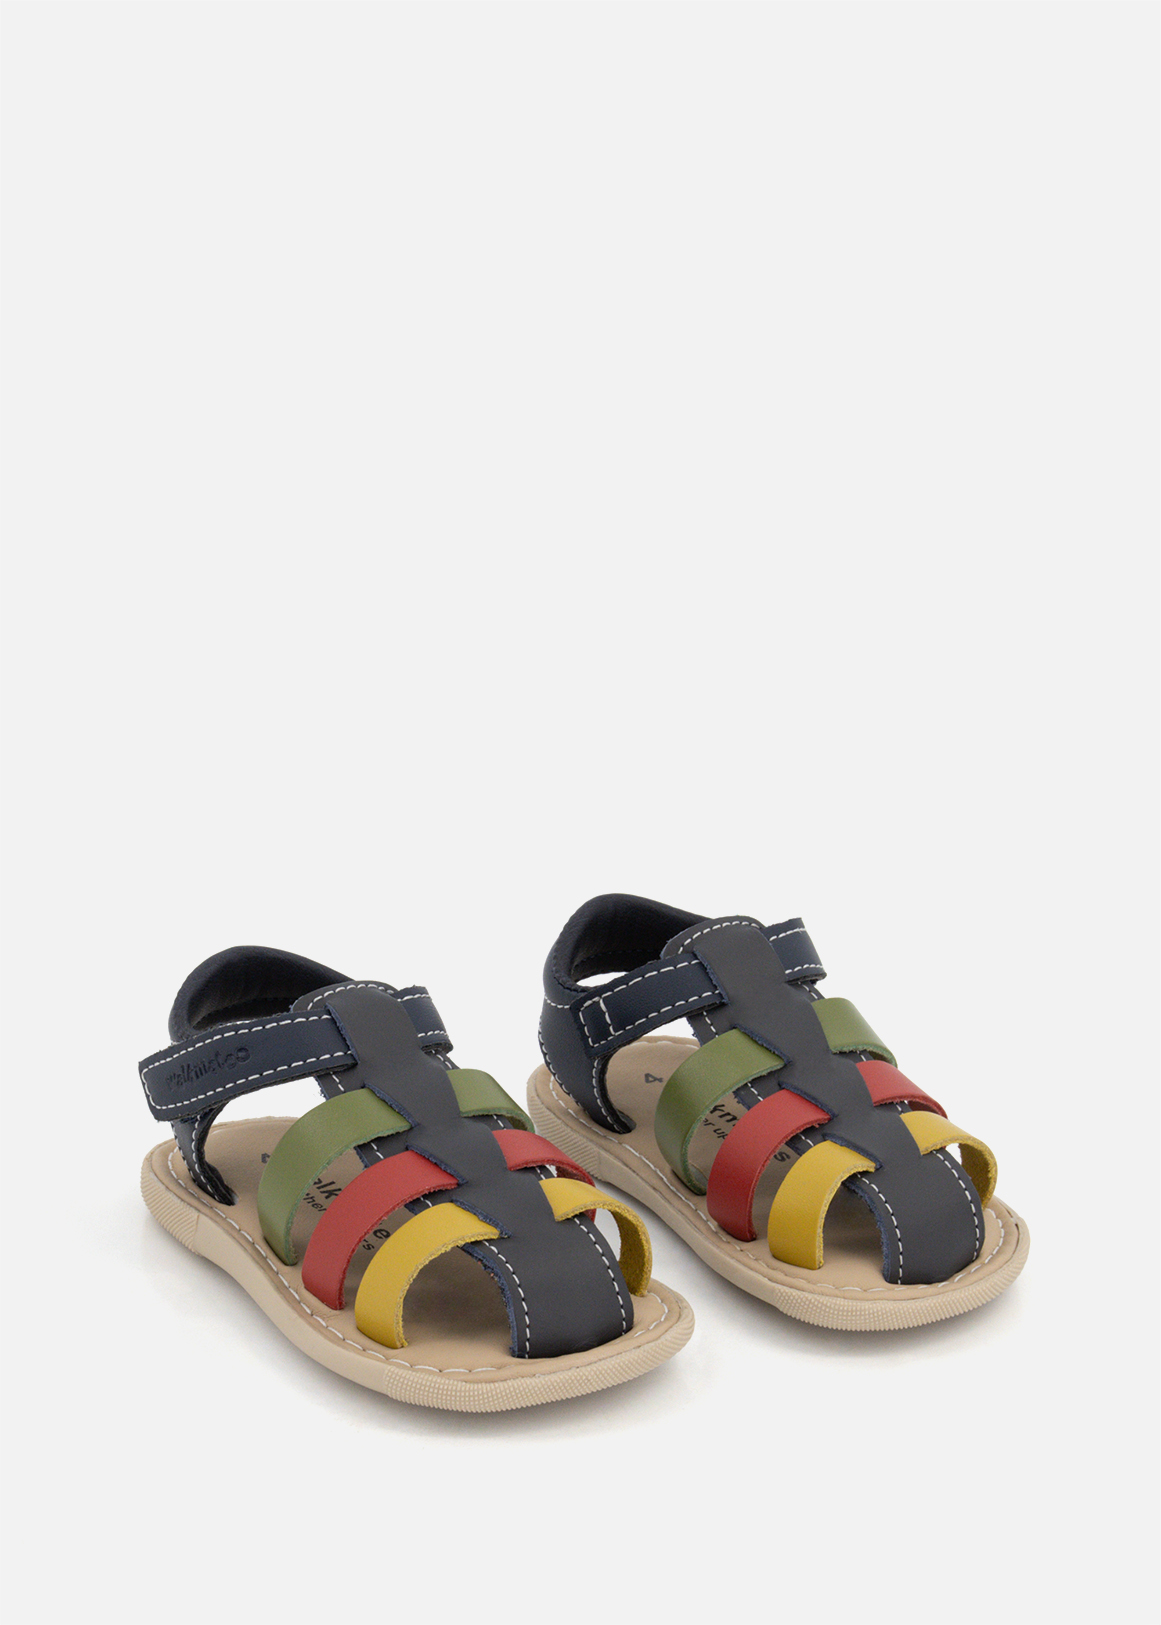 Multi Colour Leather Sandals | Woolworths.co.za